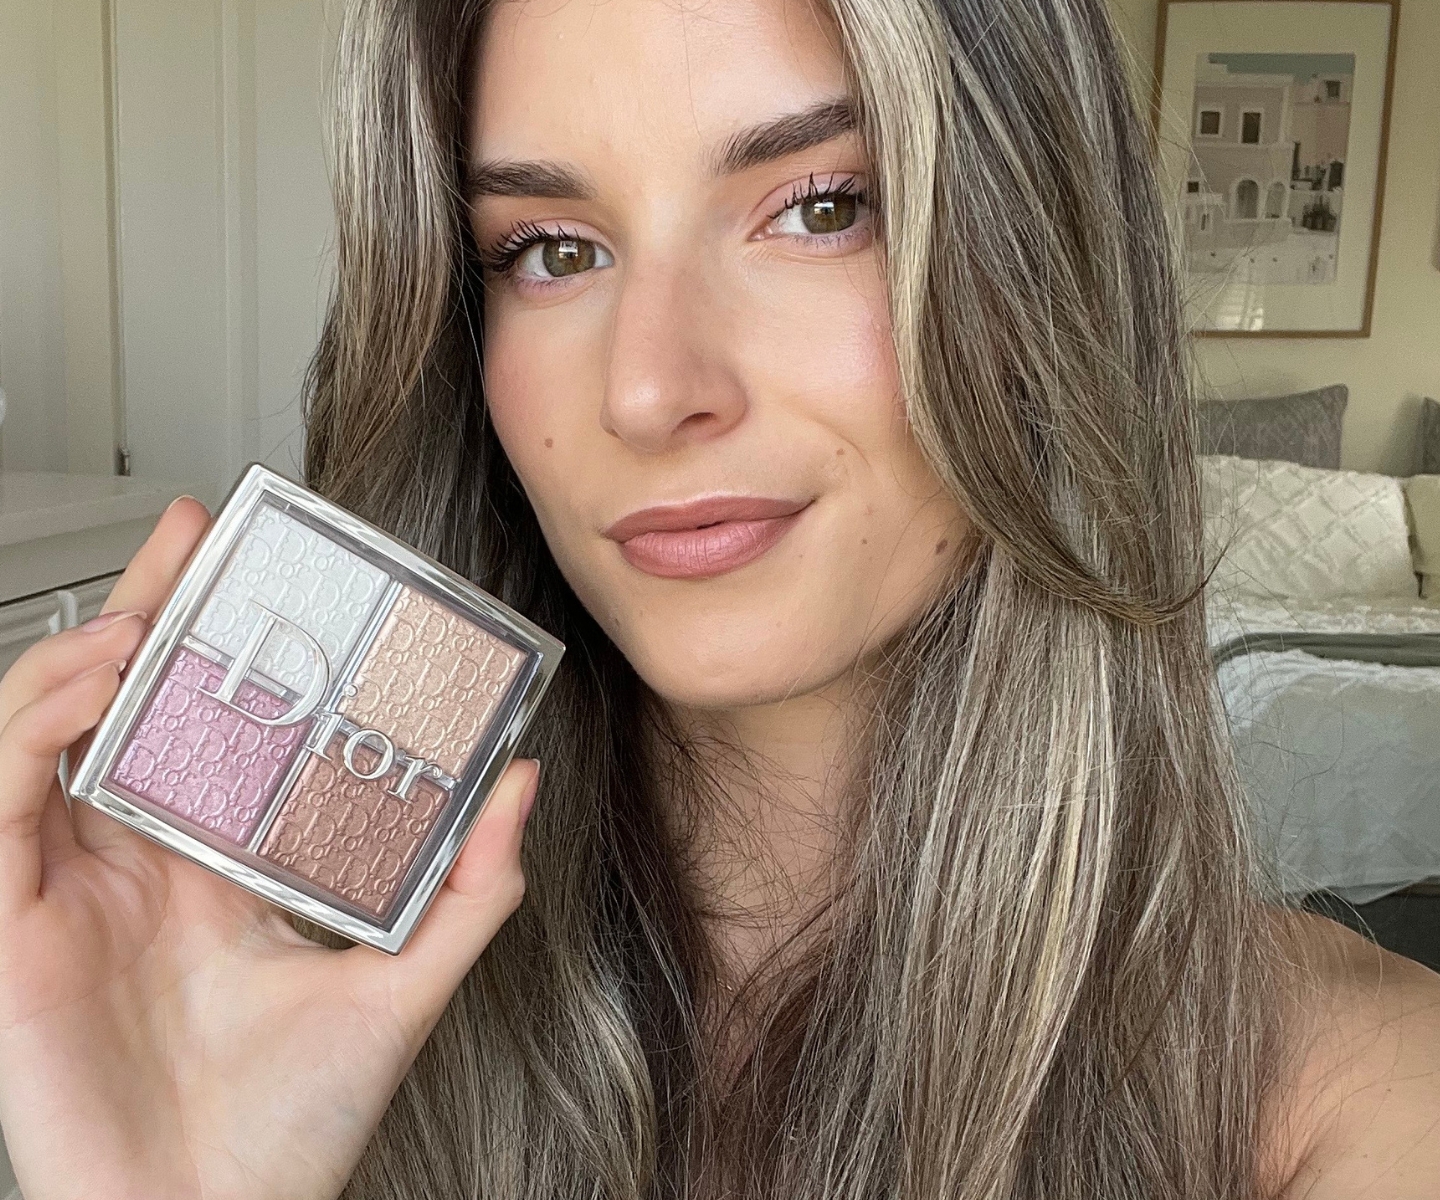 I'm a Makeup Artist & Here Are 5 DIOR Products That Are 100% Worth the Hype